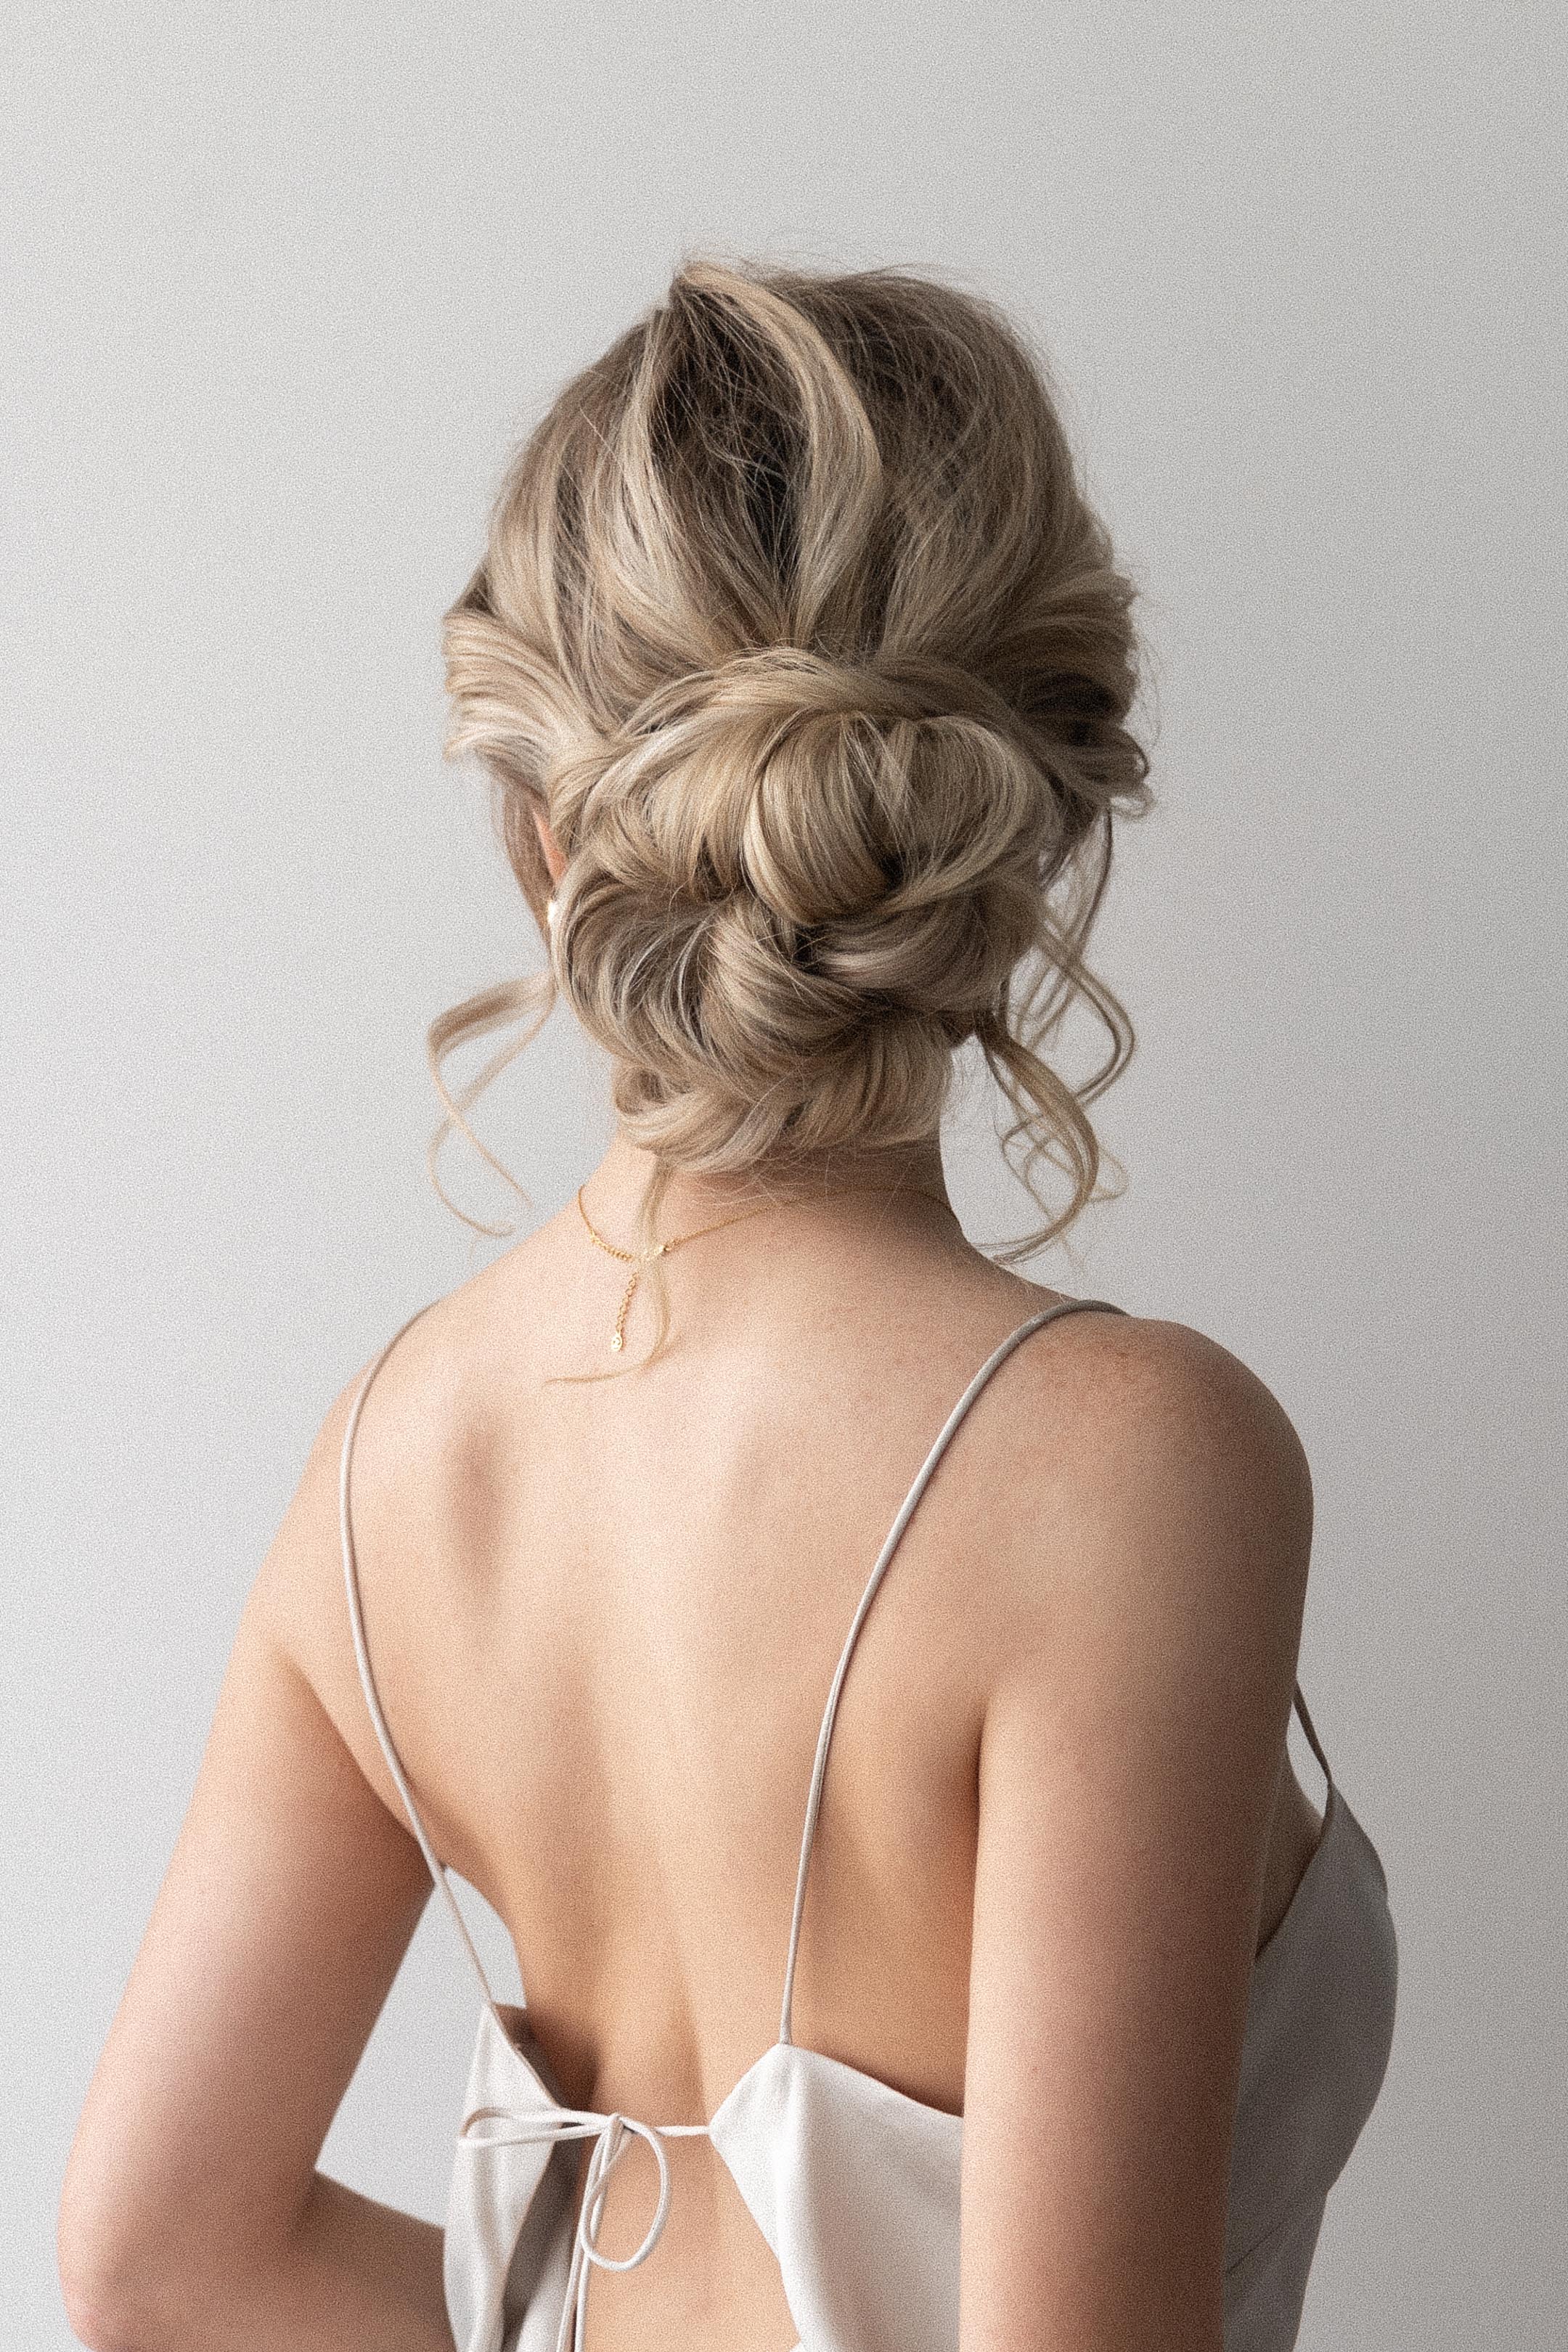 55 Chic Wedding Hairstyles for Long Hair  hitchedcouk